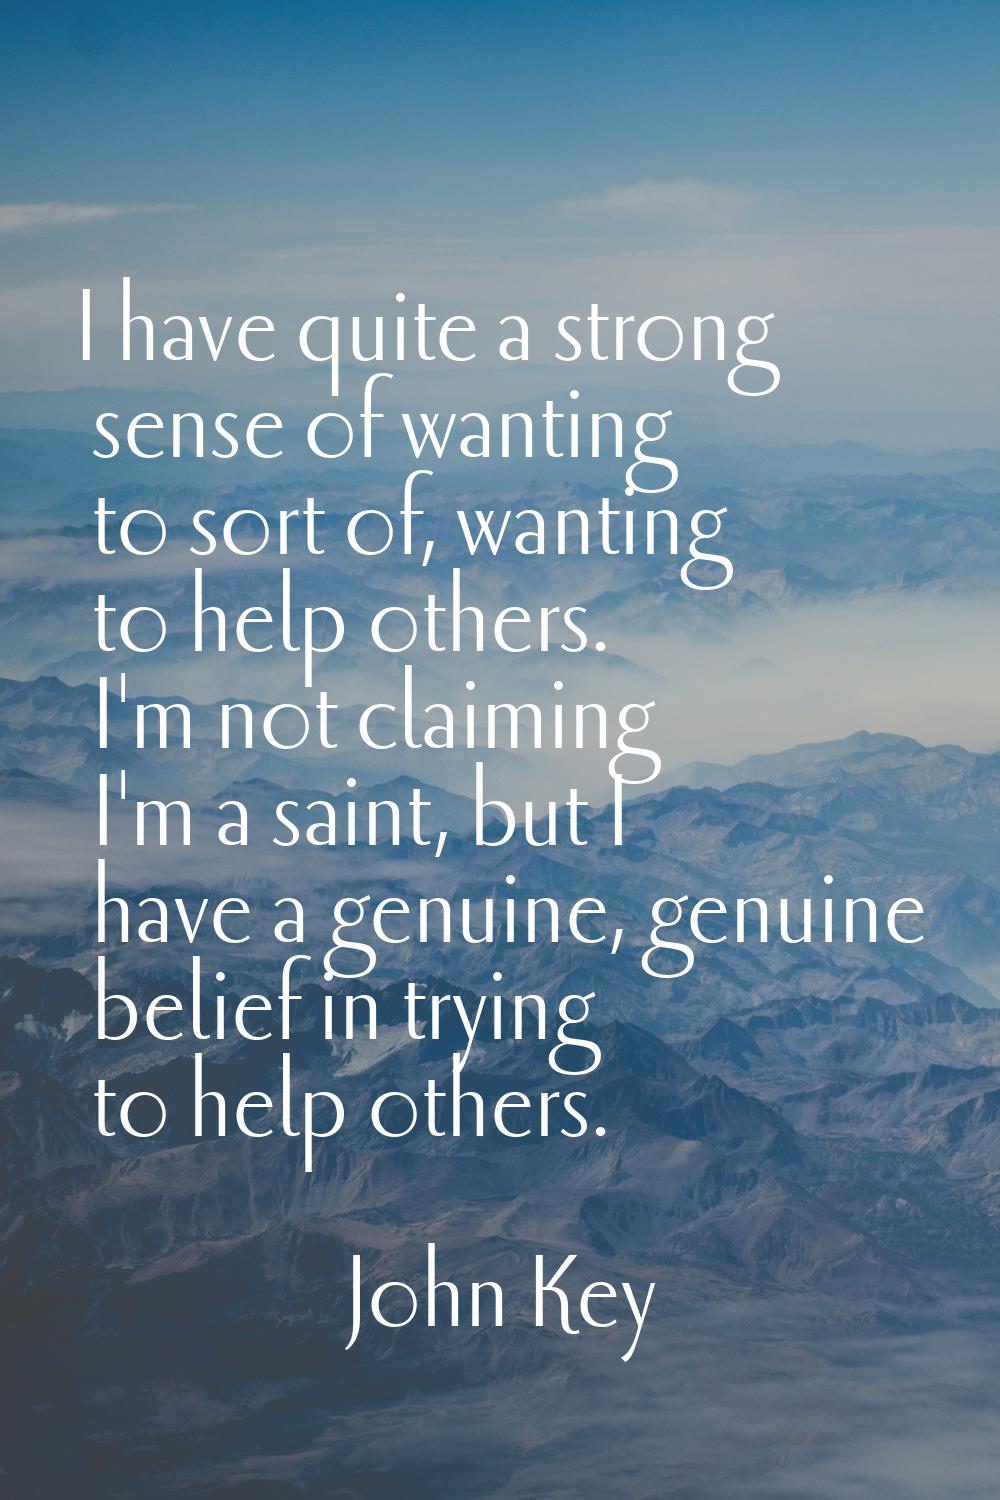 I have quite a strong sense of wanting to sort of, wanting to help others. I'm not claiming I'm a s